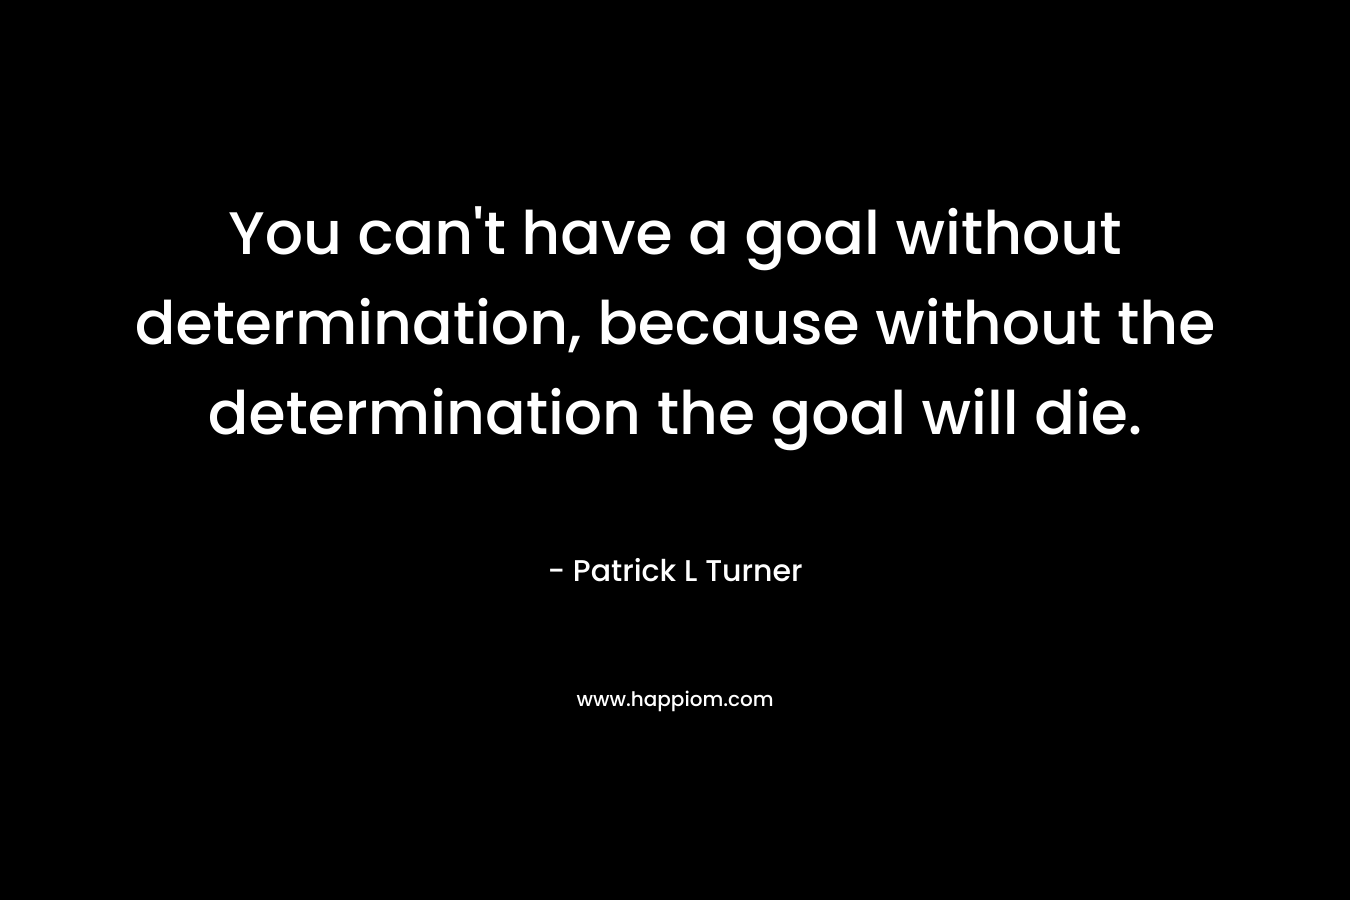 You can’t have a goal without determination, because without the determination the goal will die. – Patrick L Turner